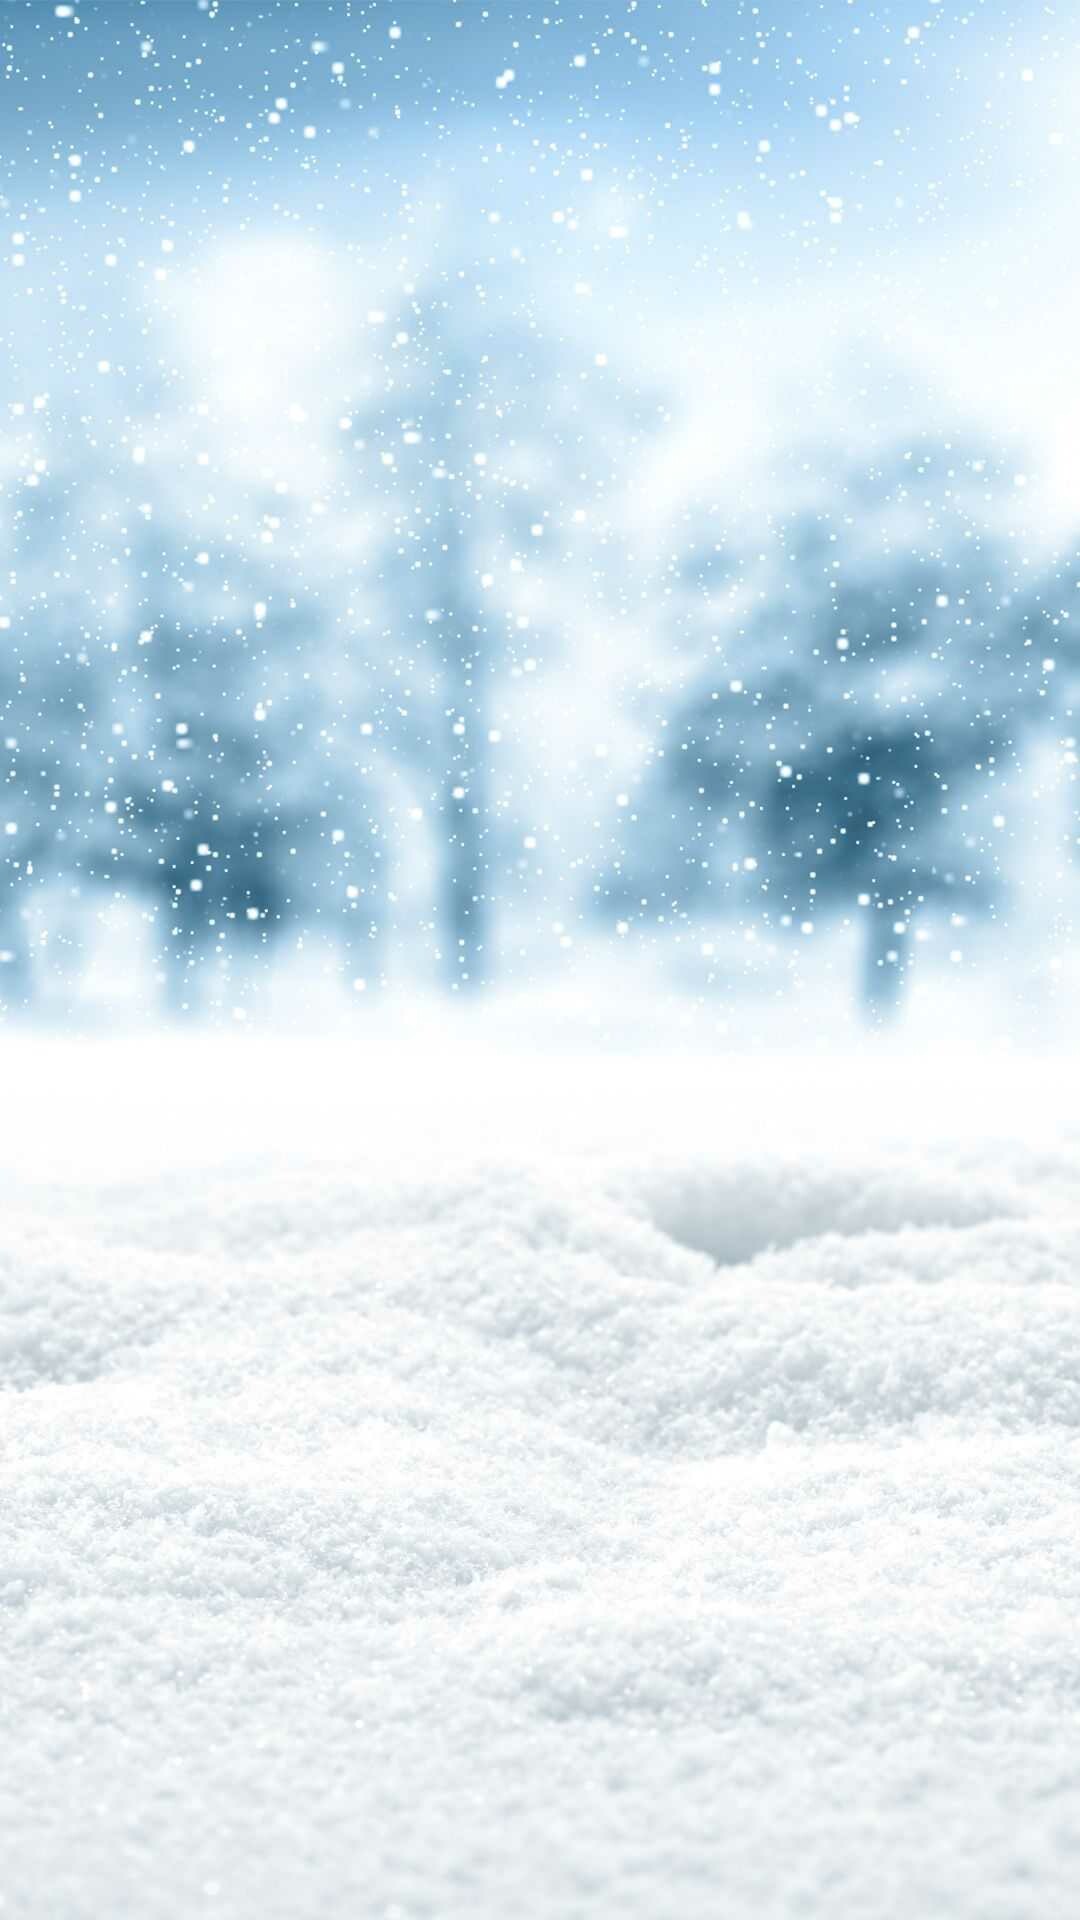 Snowfall: Precipitation, consisting of frozen crystalline water throughout its life cycle. 1080x1920 Full HD Wallpaper.